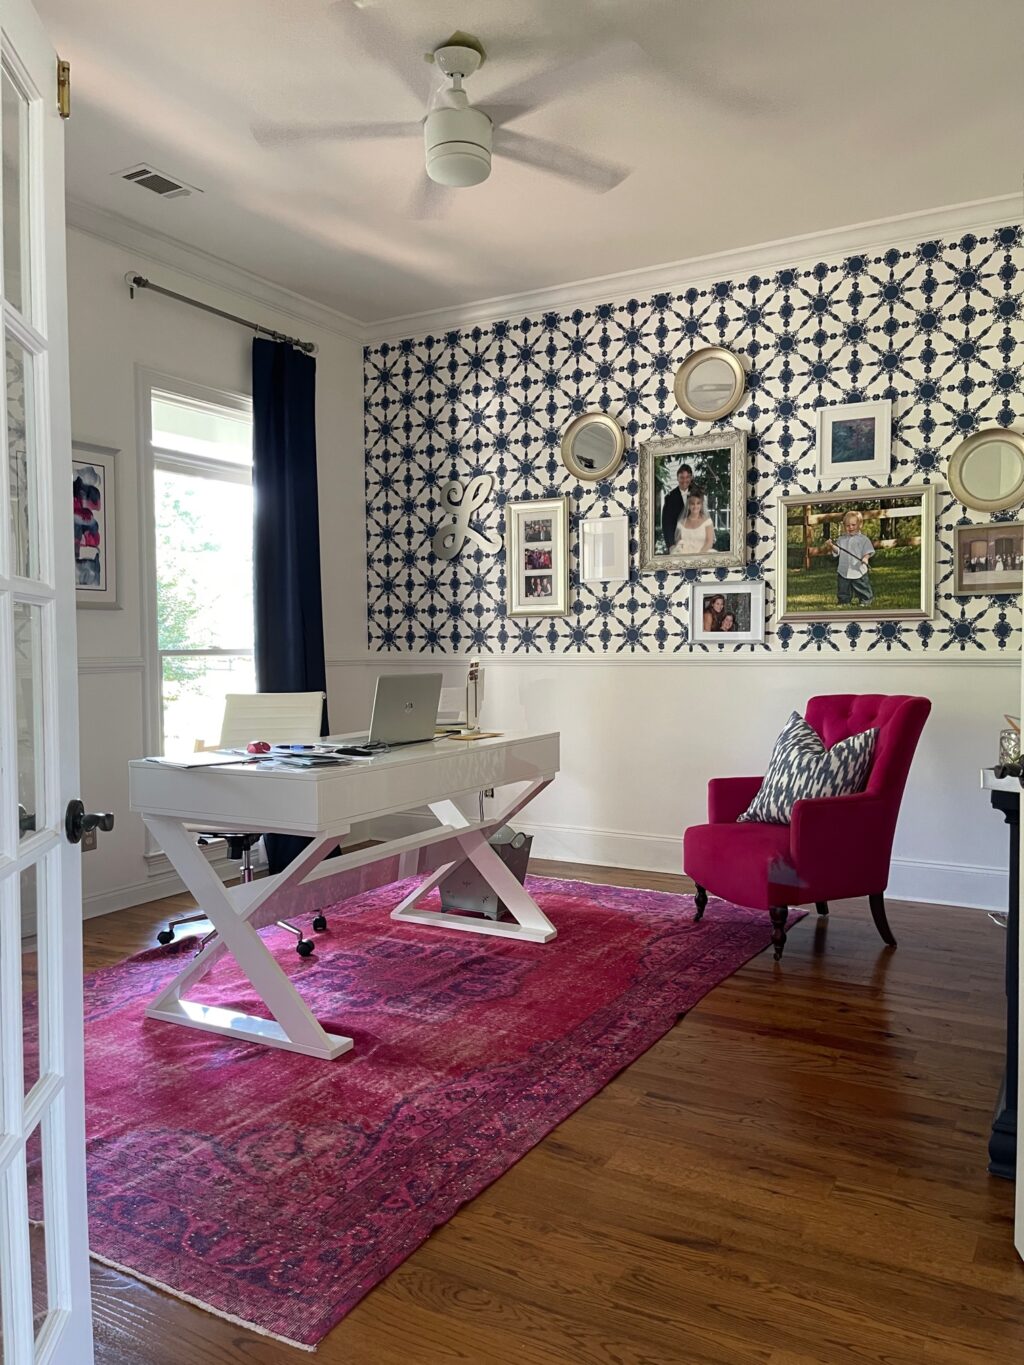 White office walls with blue patterned wallpaper and pink chair.